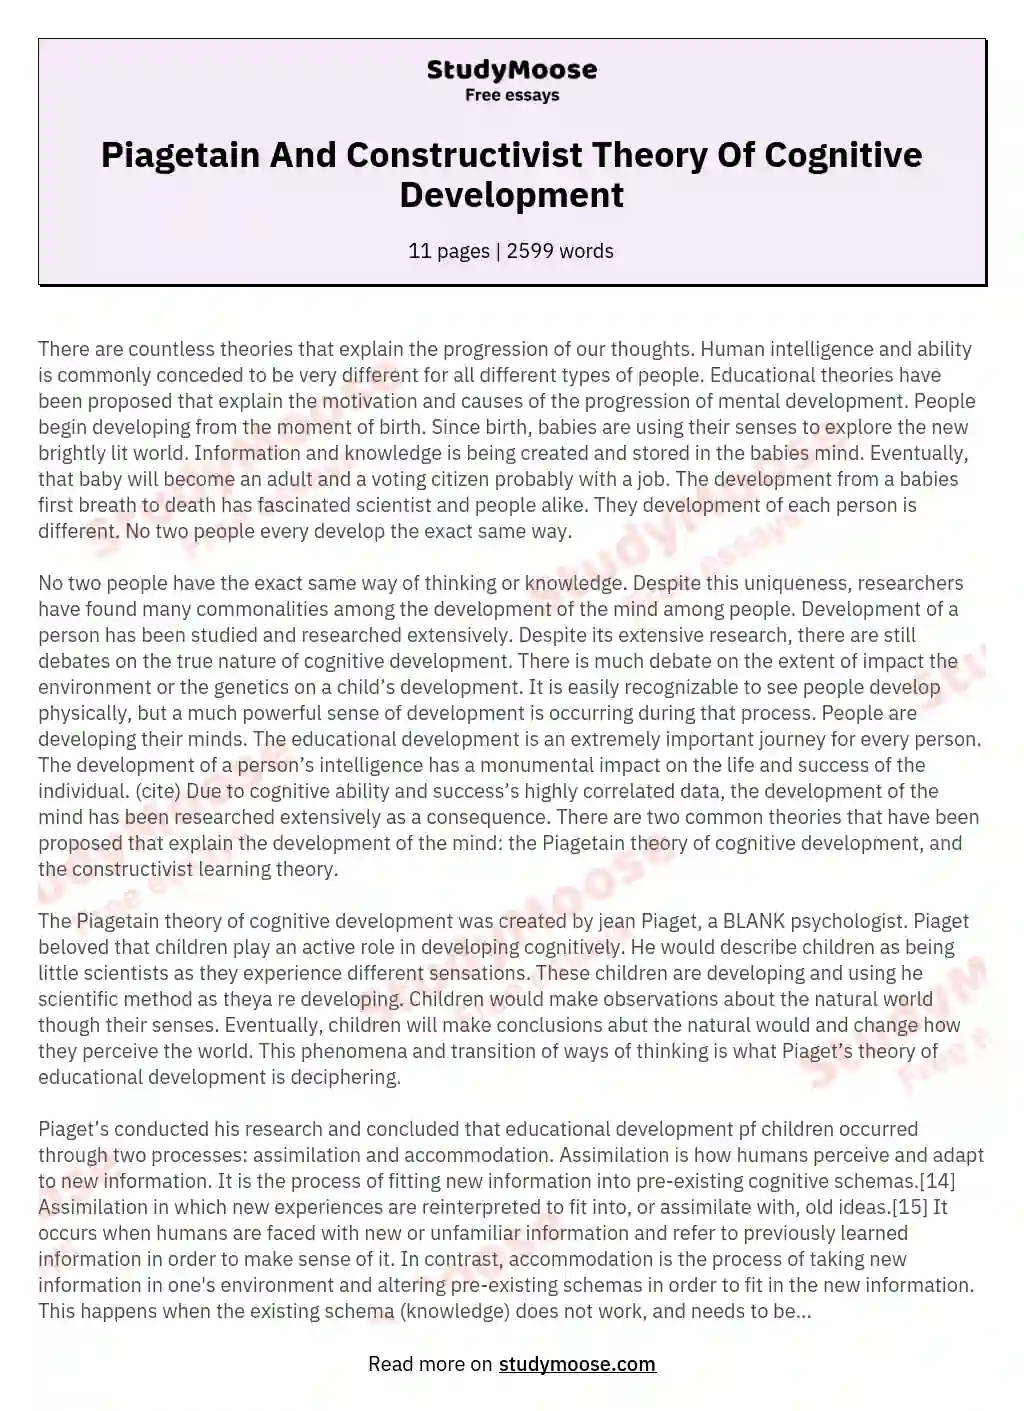 Piagetain And Constructivist Theory Of Cognitive Development essay